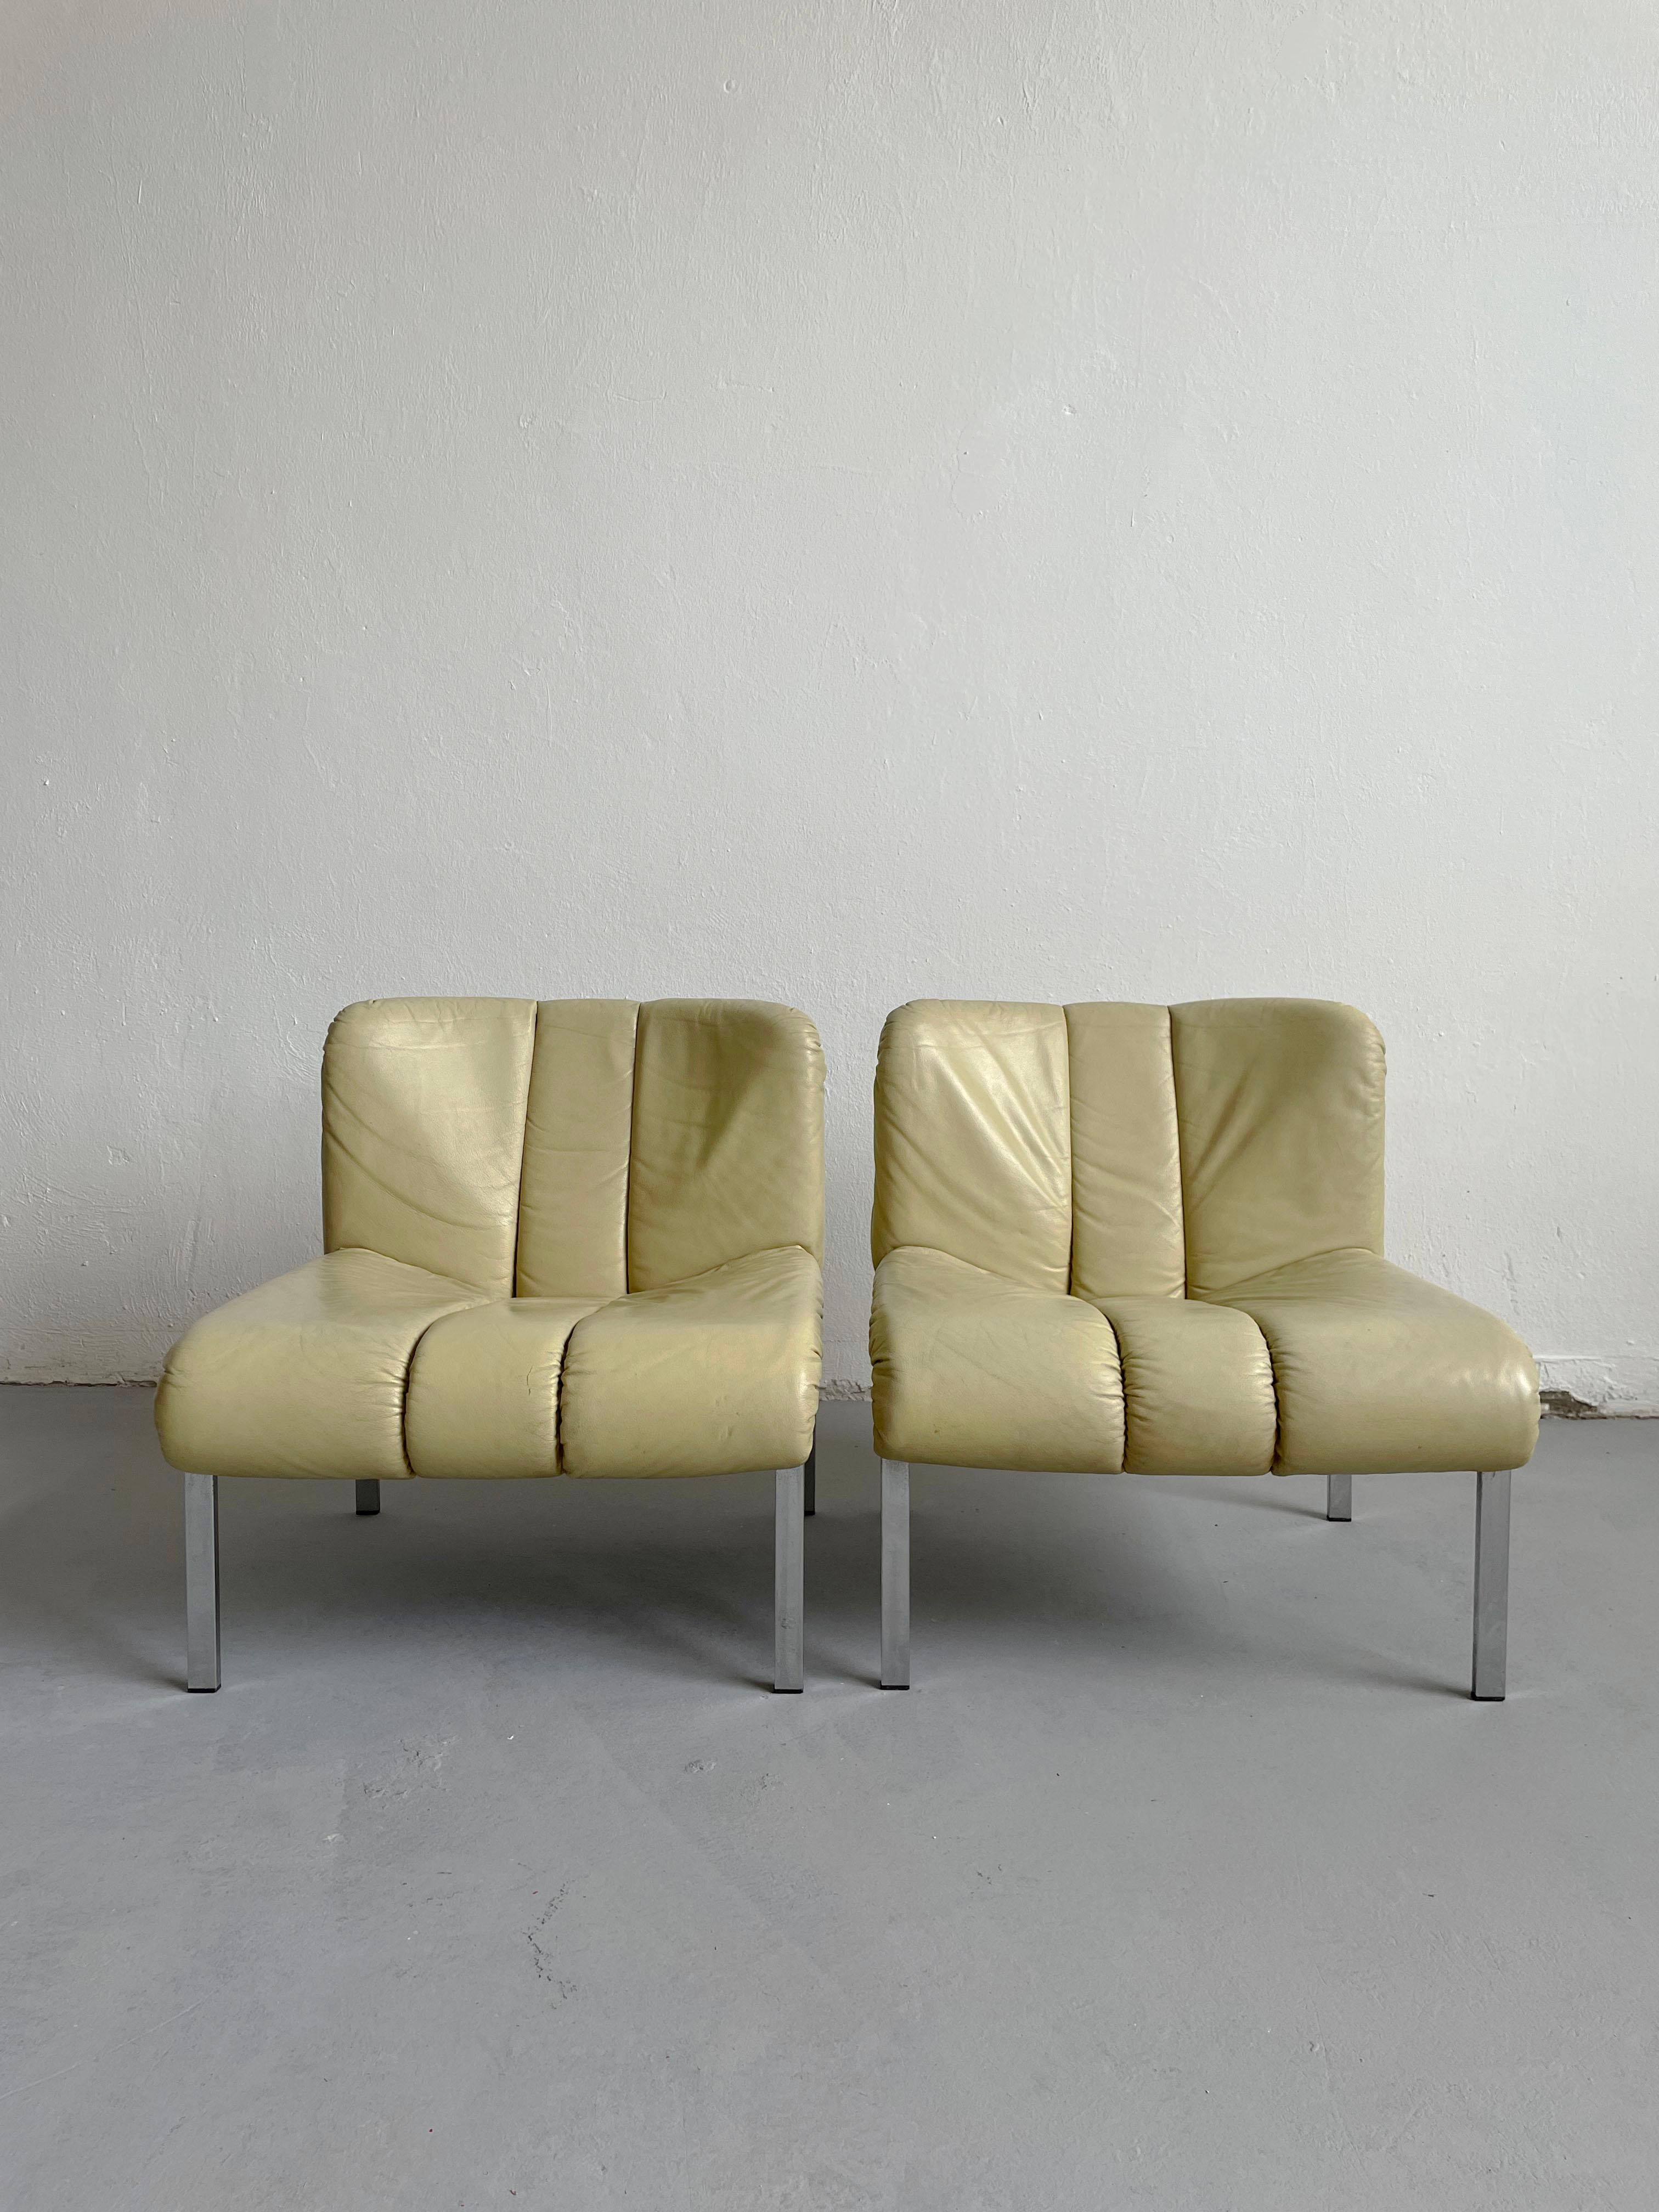 Set of 2 Mid-Century Modern lounge chairs by Hans Eichenberger for Girsberger ‘Eurochair’, model 1200, in beige leather and chrome plated steel frame

Switzerland, 1970s.

In good original condition, the leather is soft and with small age and